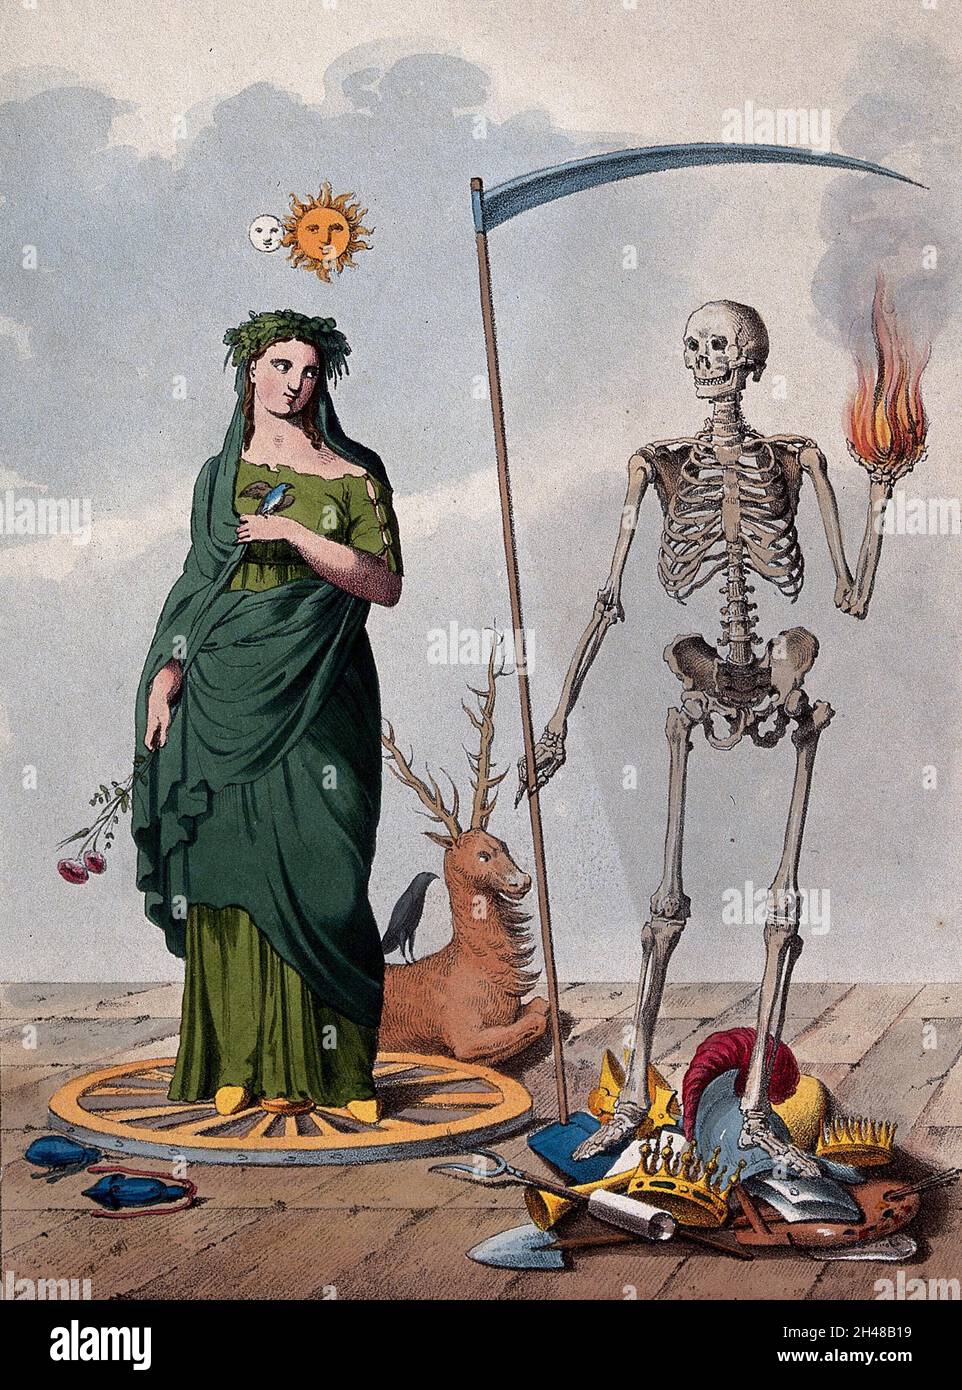 Two allegorical figures: a skeleton holding a scythe and a ball of fire stands next to a female figure. Lithograph. Stock Photo